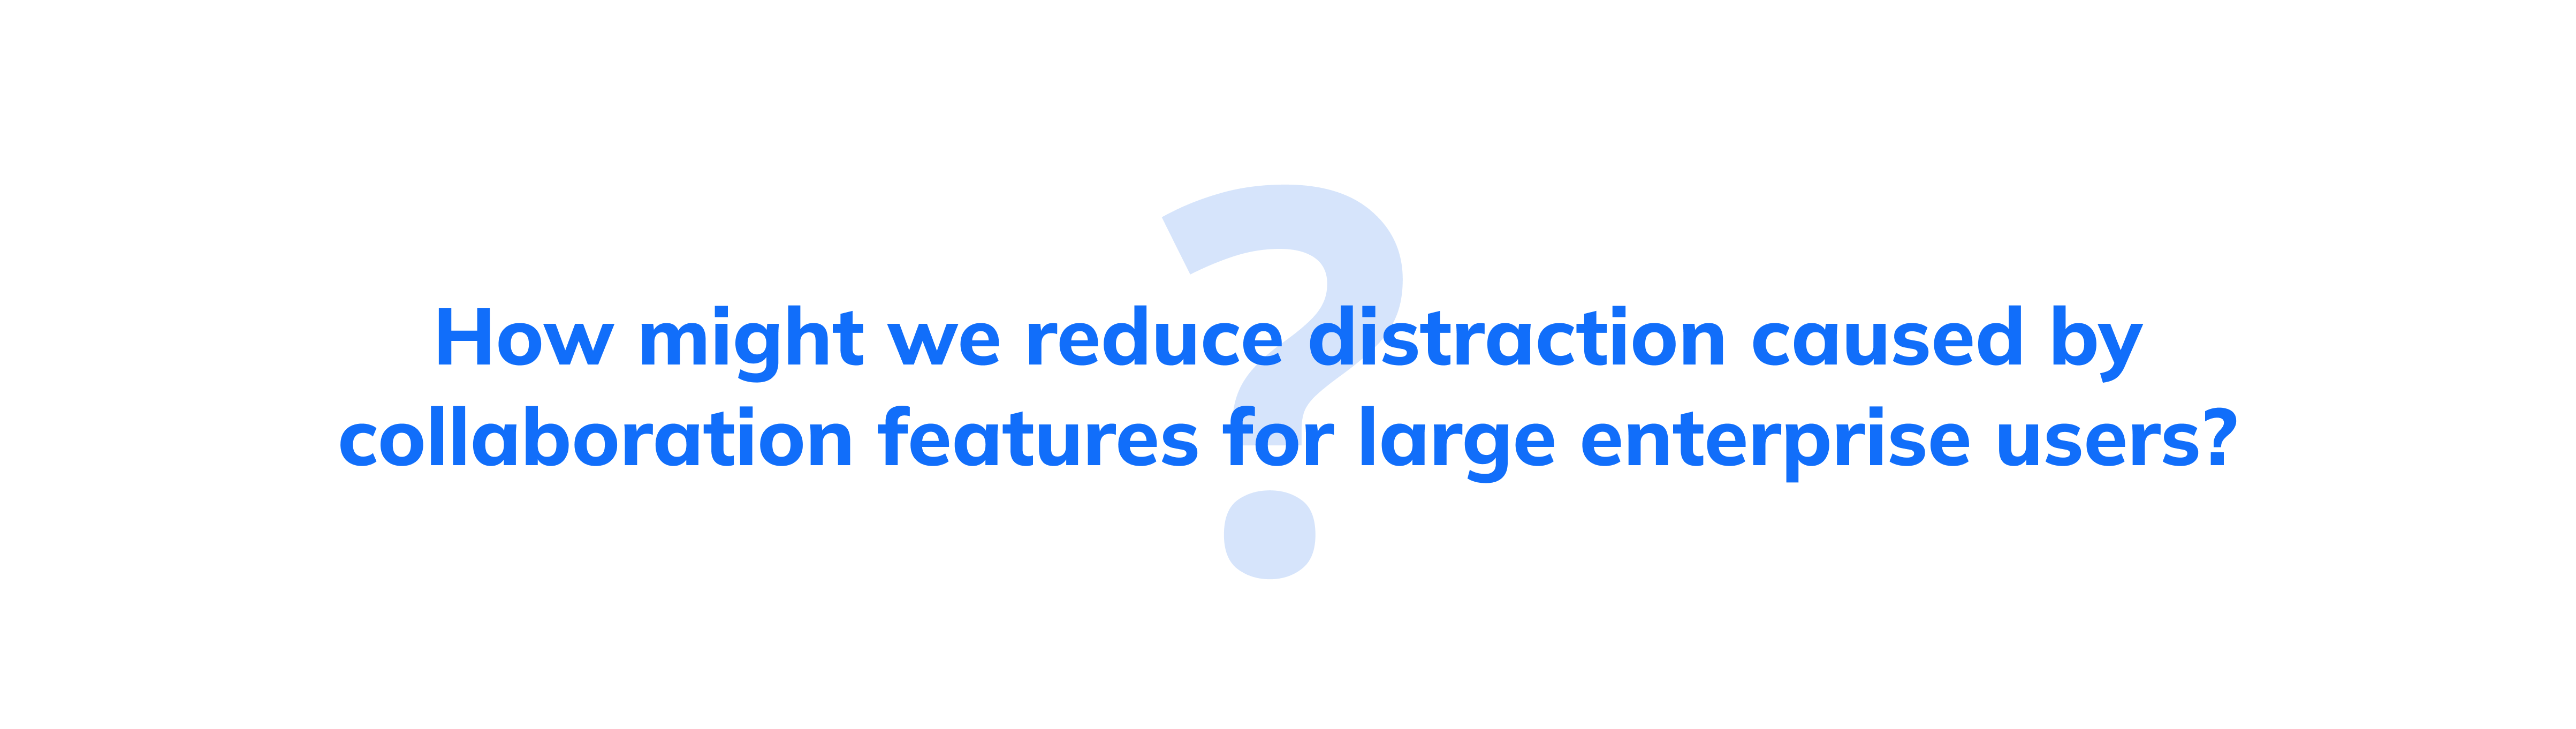 How might we reduce distraction caused by collboration feature for large enterprise users?